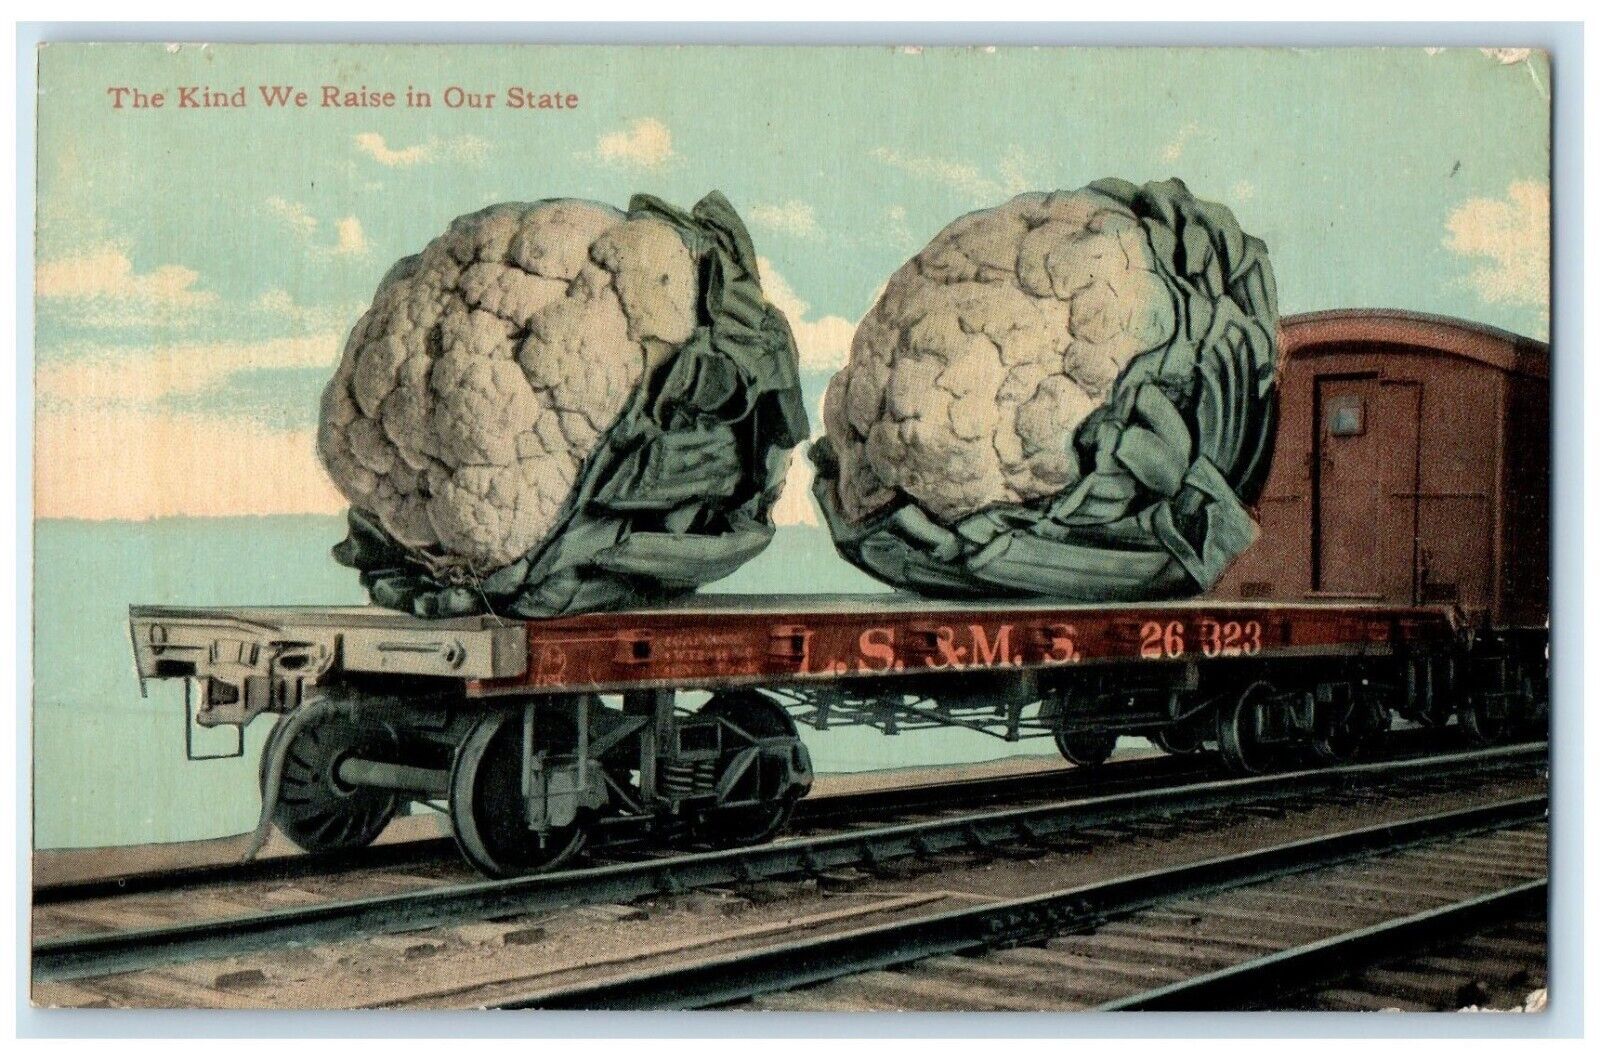 Exaggerated Cauliflower LS&MS Train The Kind We Raise In Our State Postcard